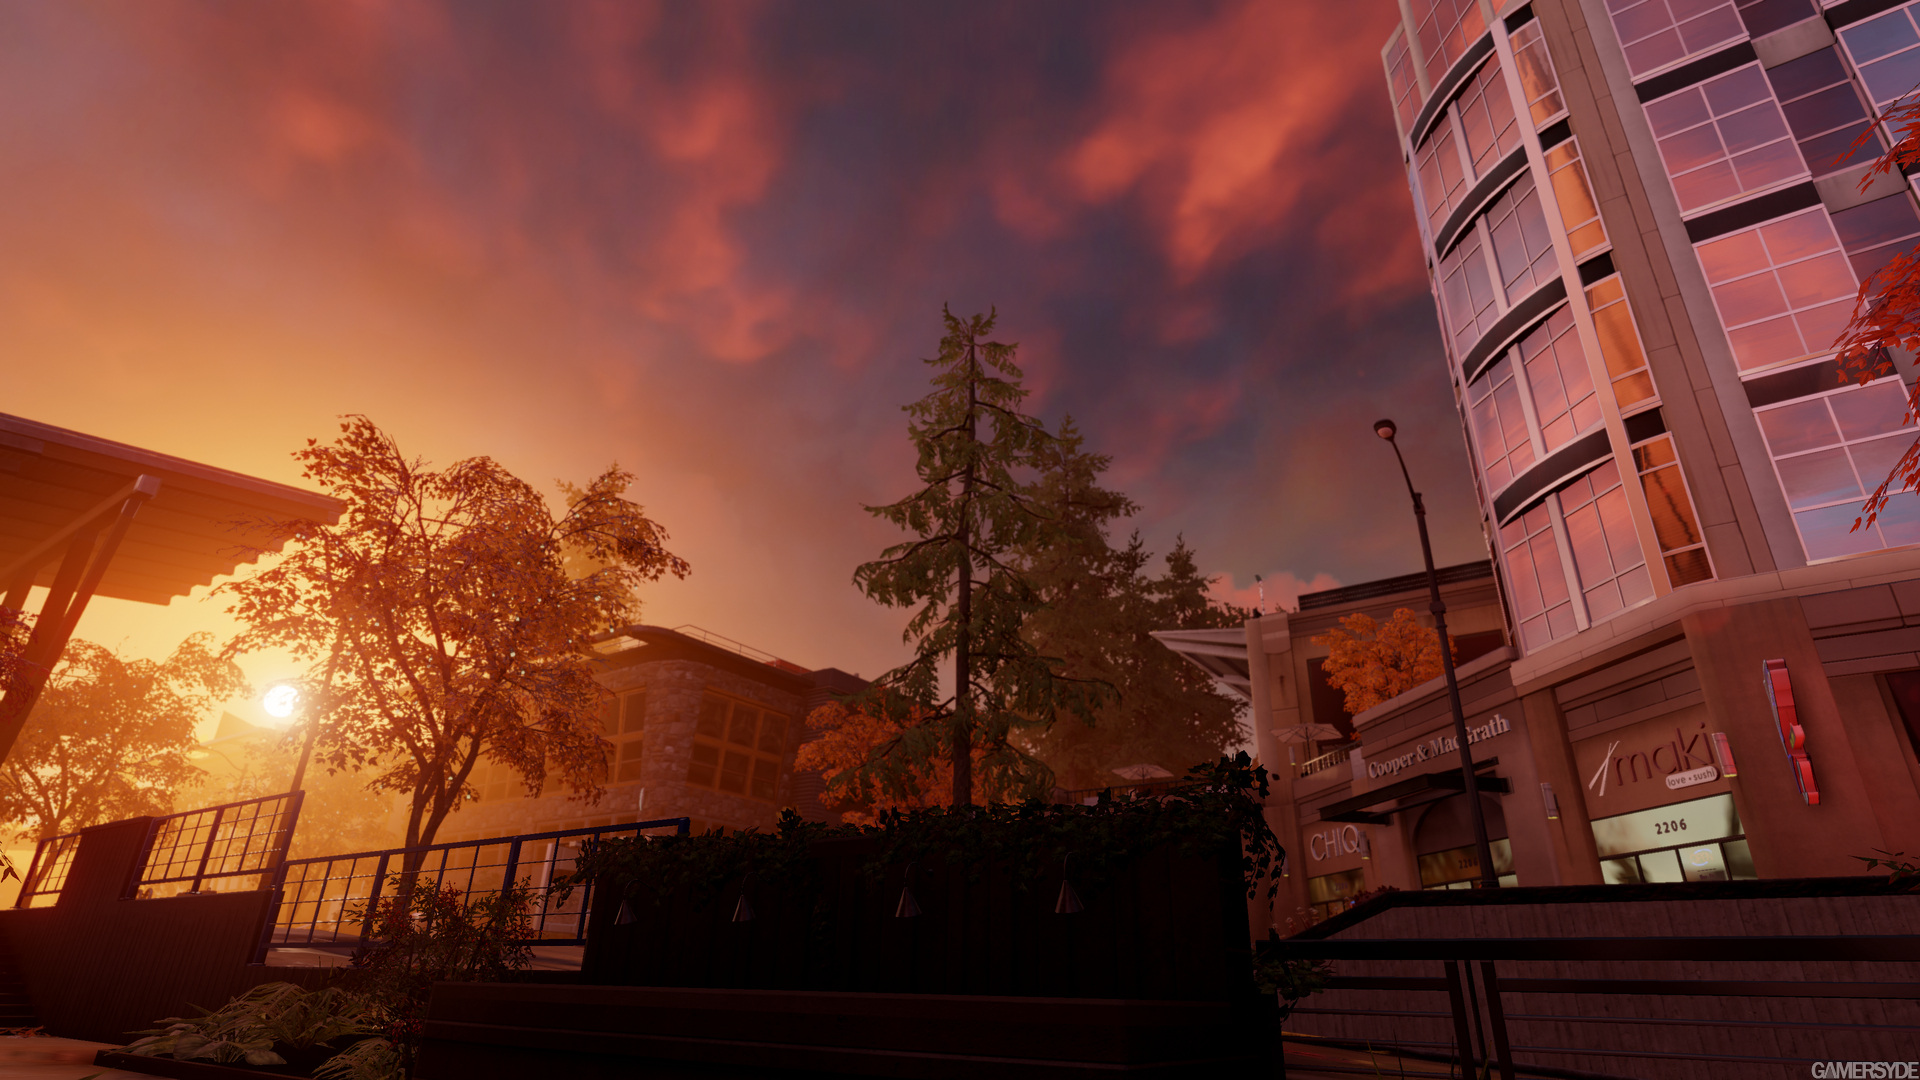 image_infamous_second_son-22309-2661_0009.jpg